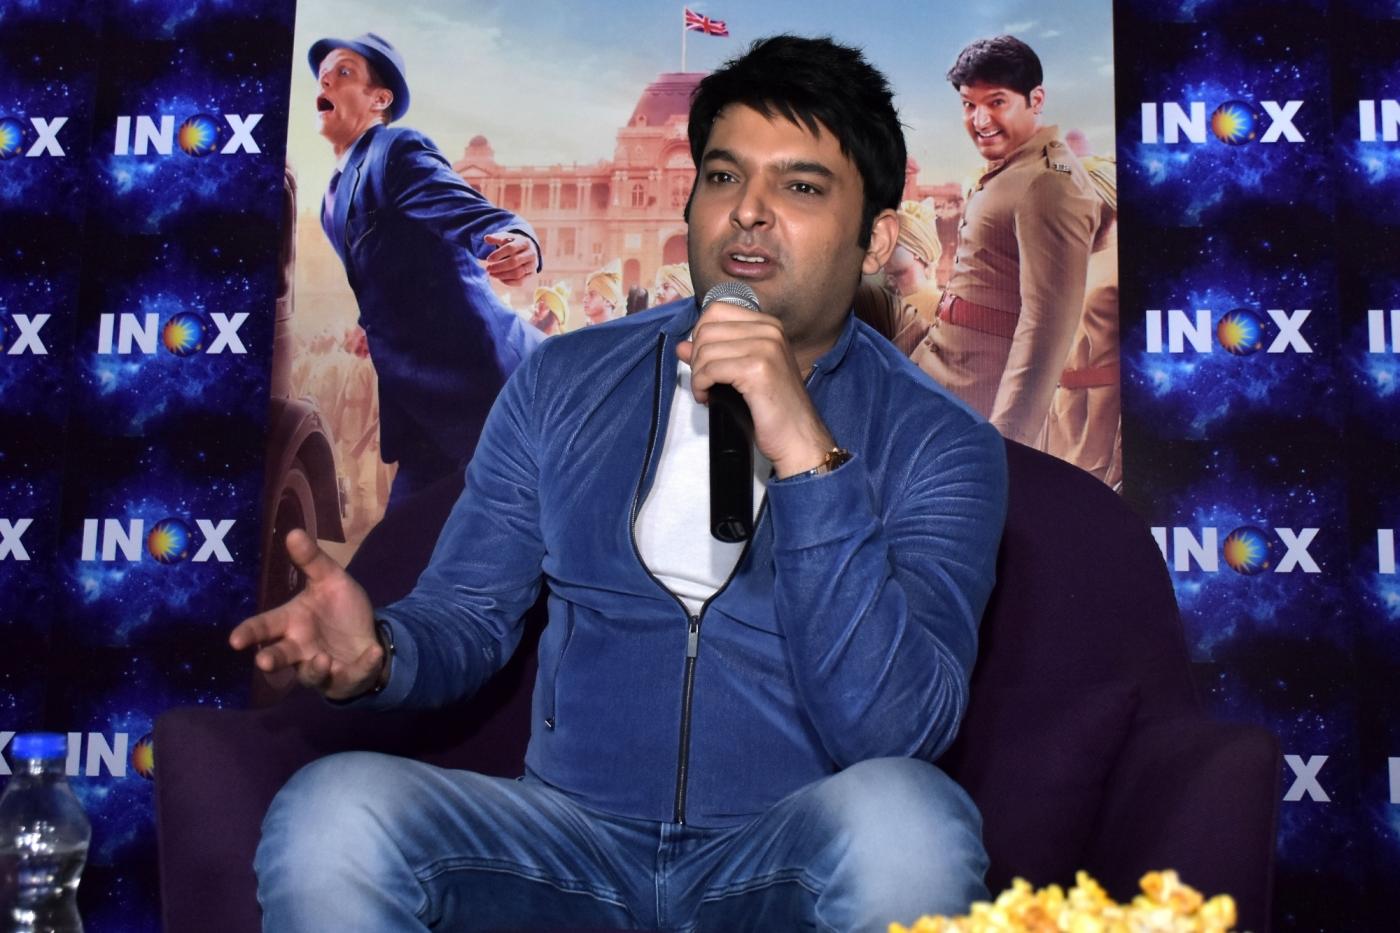 Jaipur: Actor and stand-up comedian Kapil Sharma during a press conference to promote his upcoming film "Firangi" in Jaipur on Oct 27, 2017. (Photo: Ravi Shankar Vyas/IANS) by .